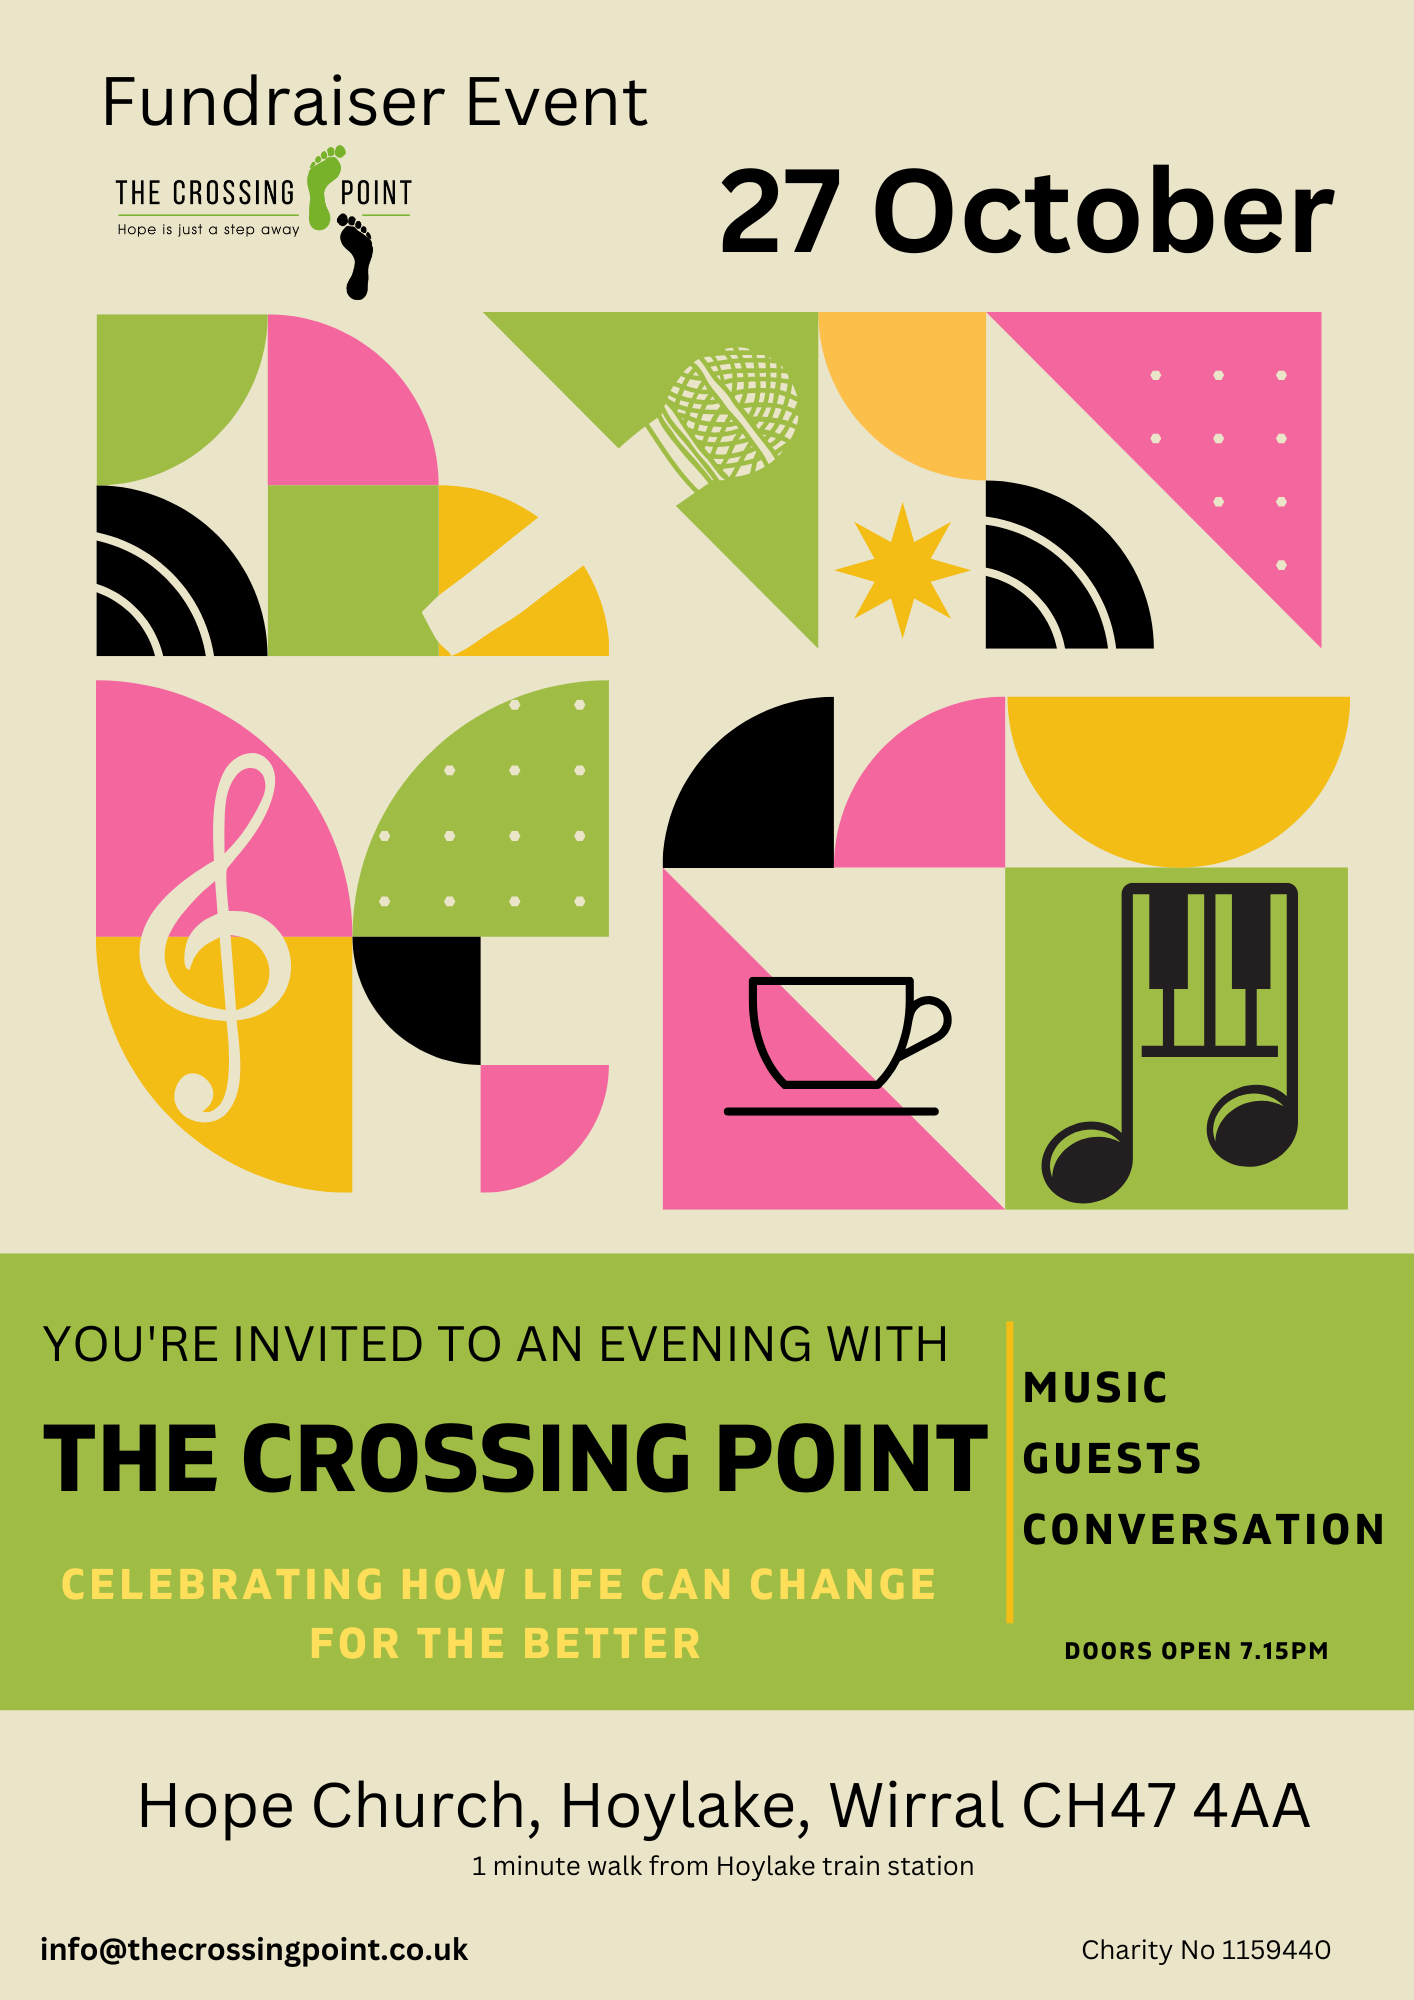 AN EVENING WITH THE CROSSING POINT